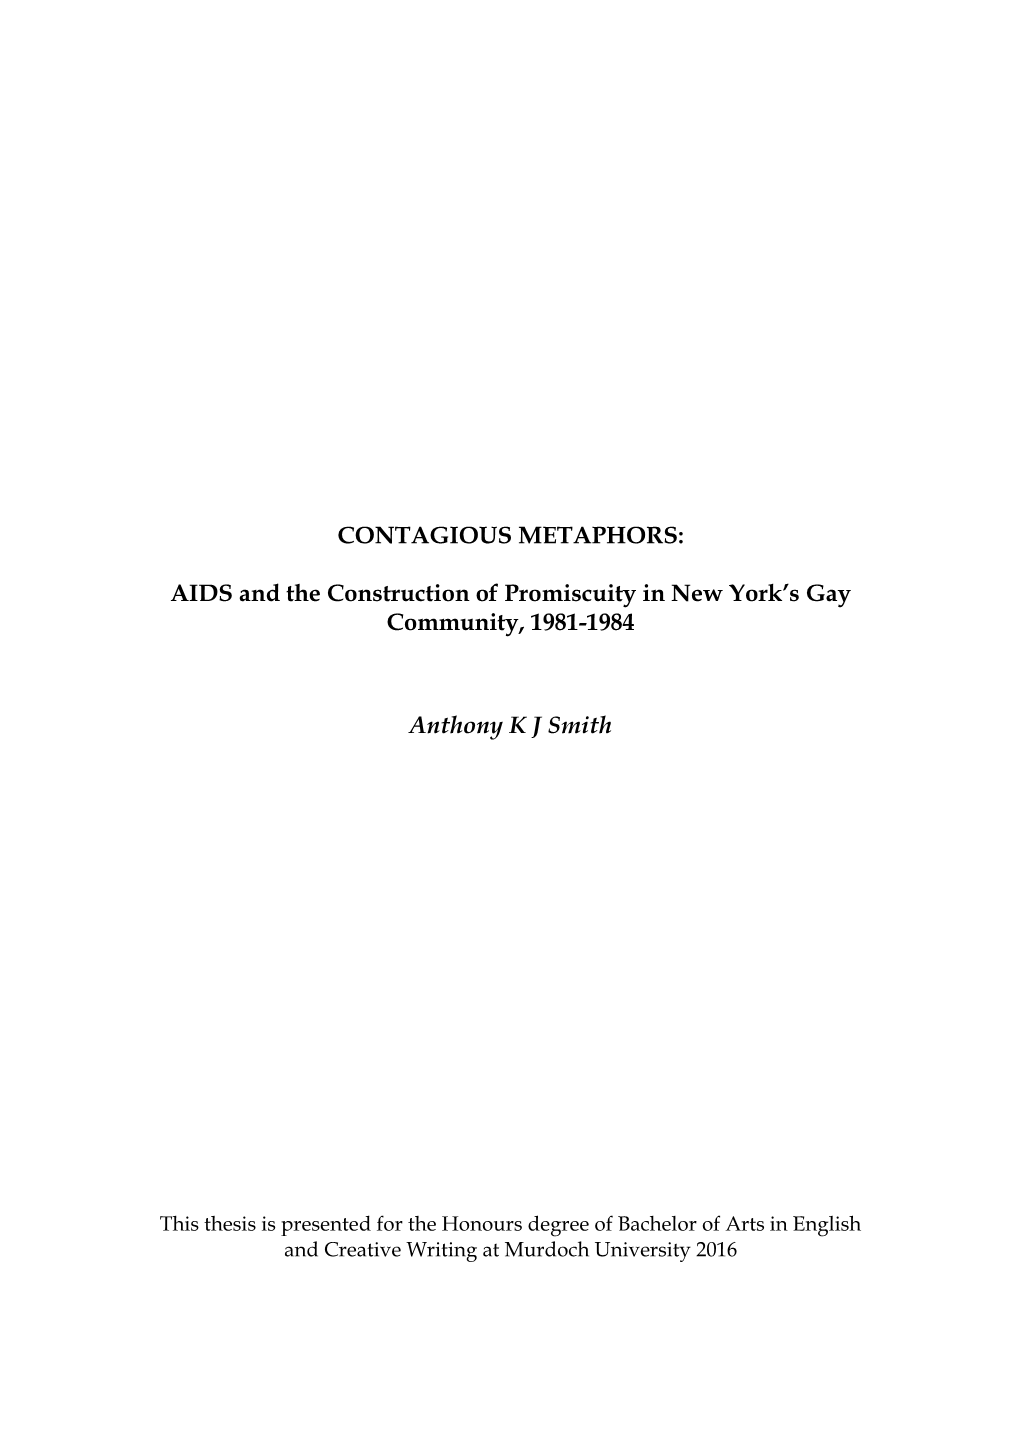 AIDS and the Construction of Promiscuity in New York's Gay Community, 1981-1984 Anthony KJ Smith